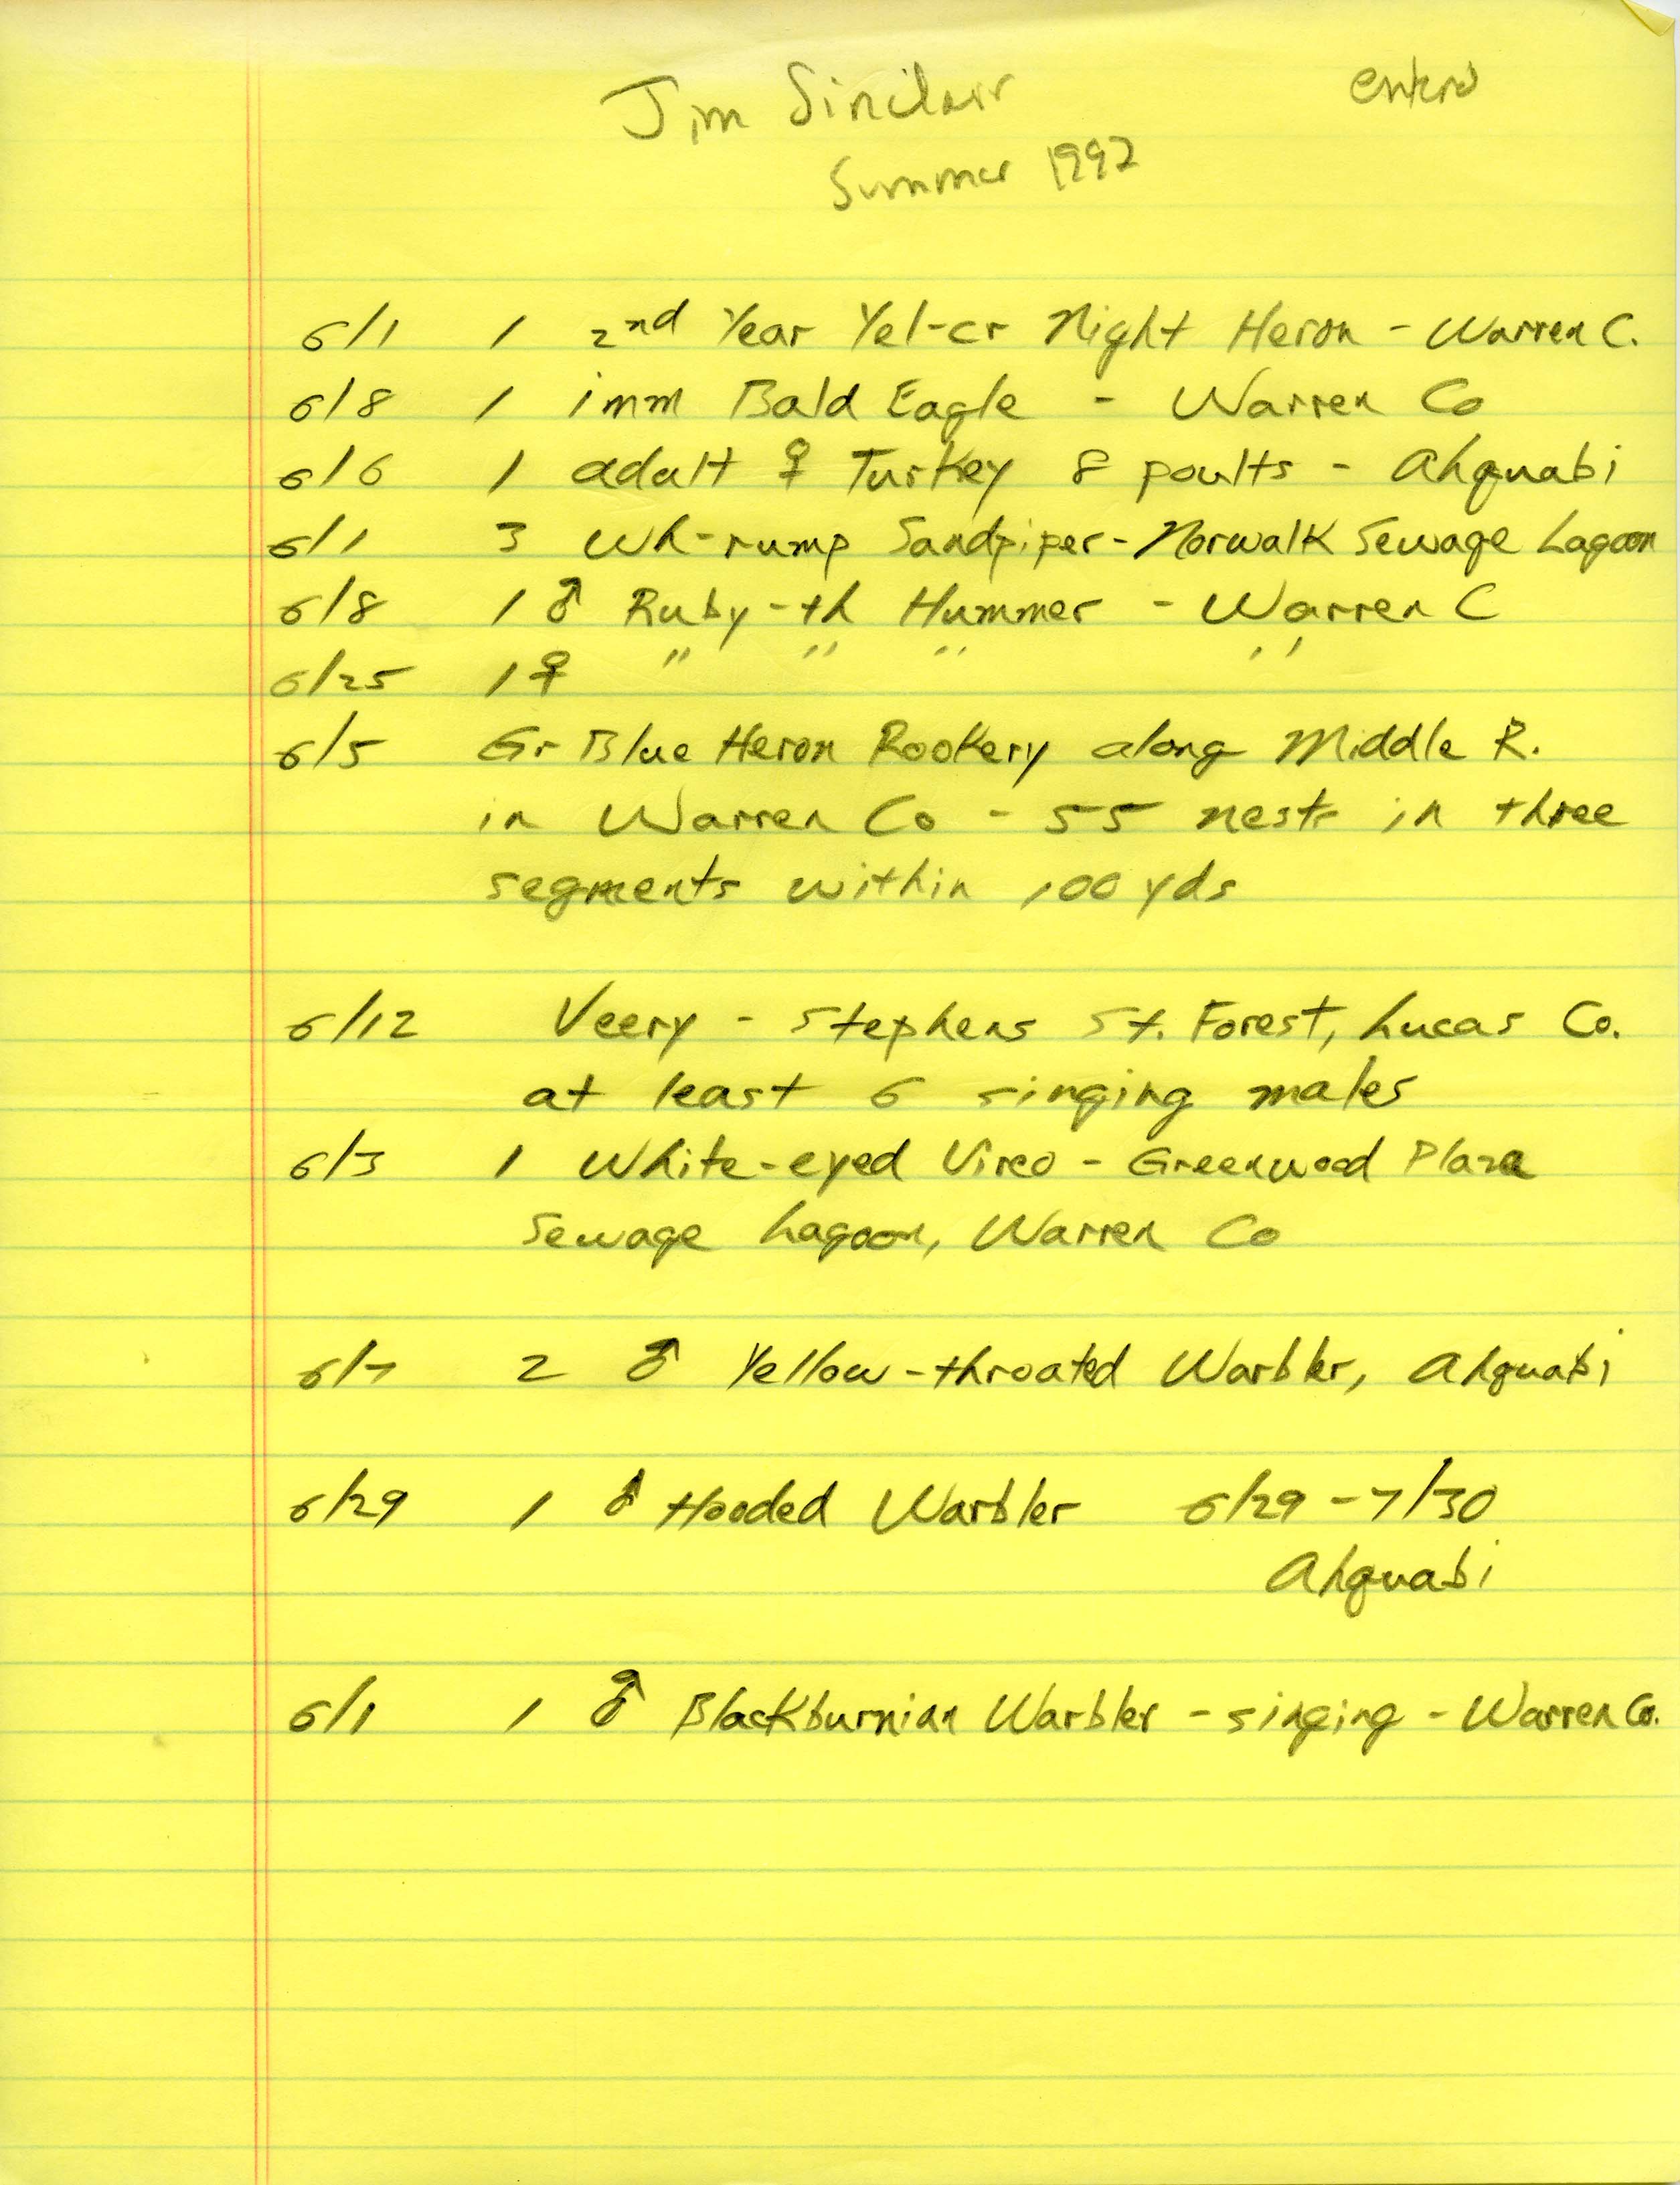 Field notes contributed by Jim Sinclair, summer 1997